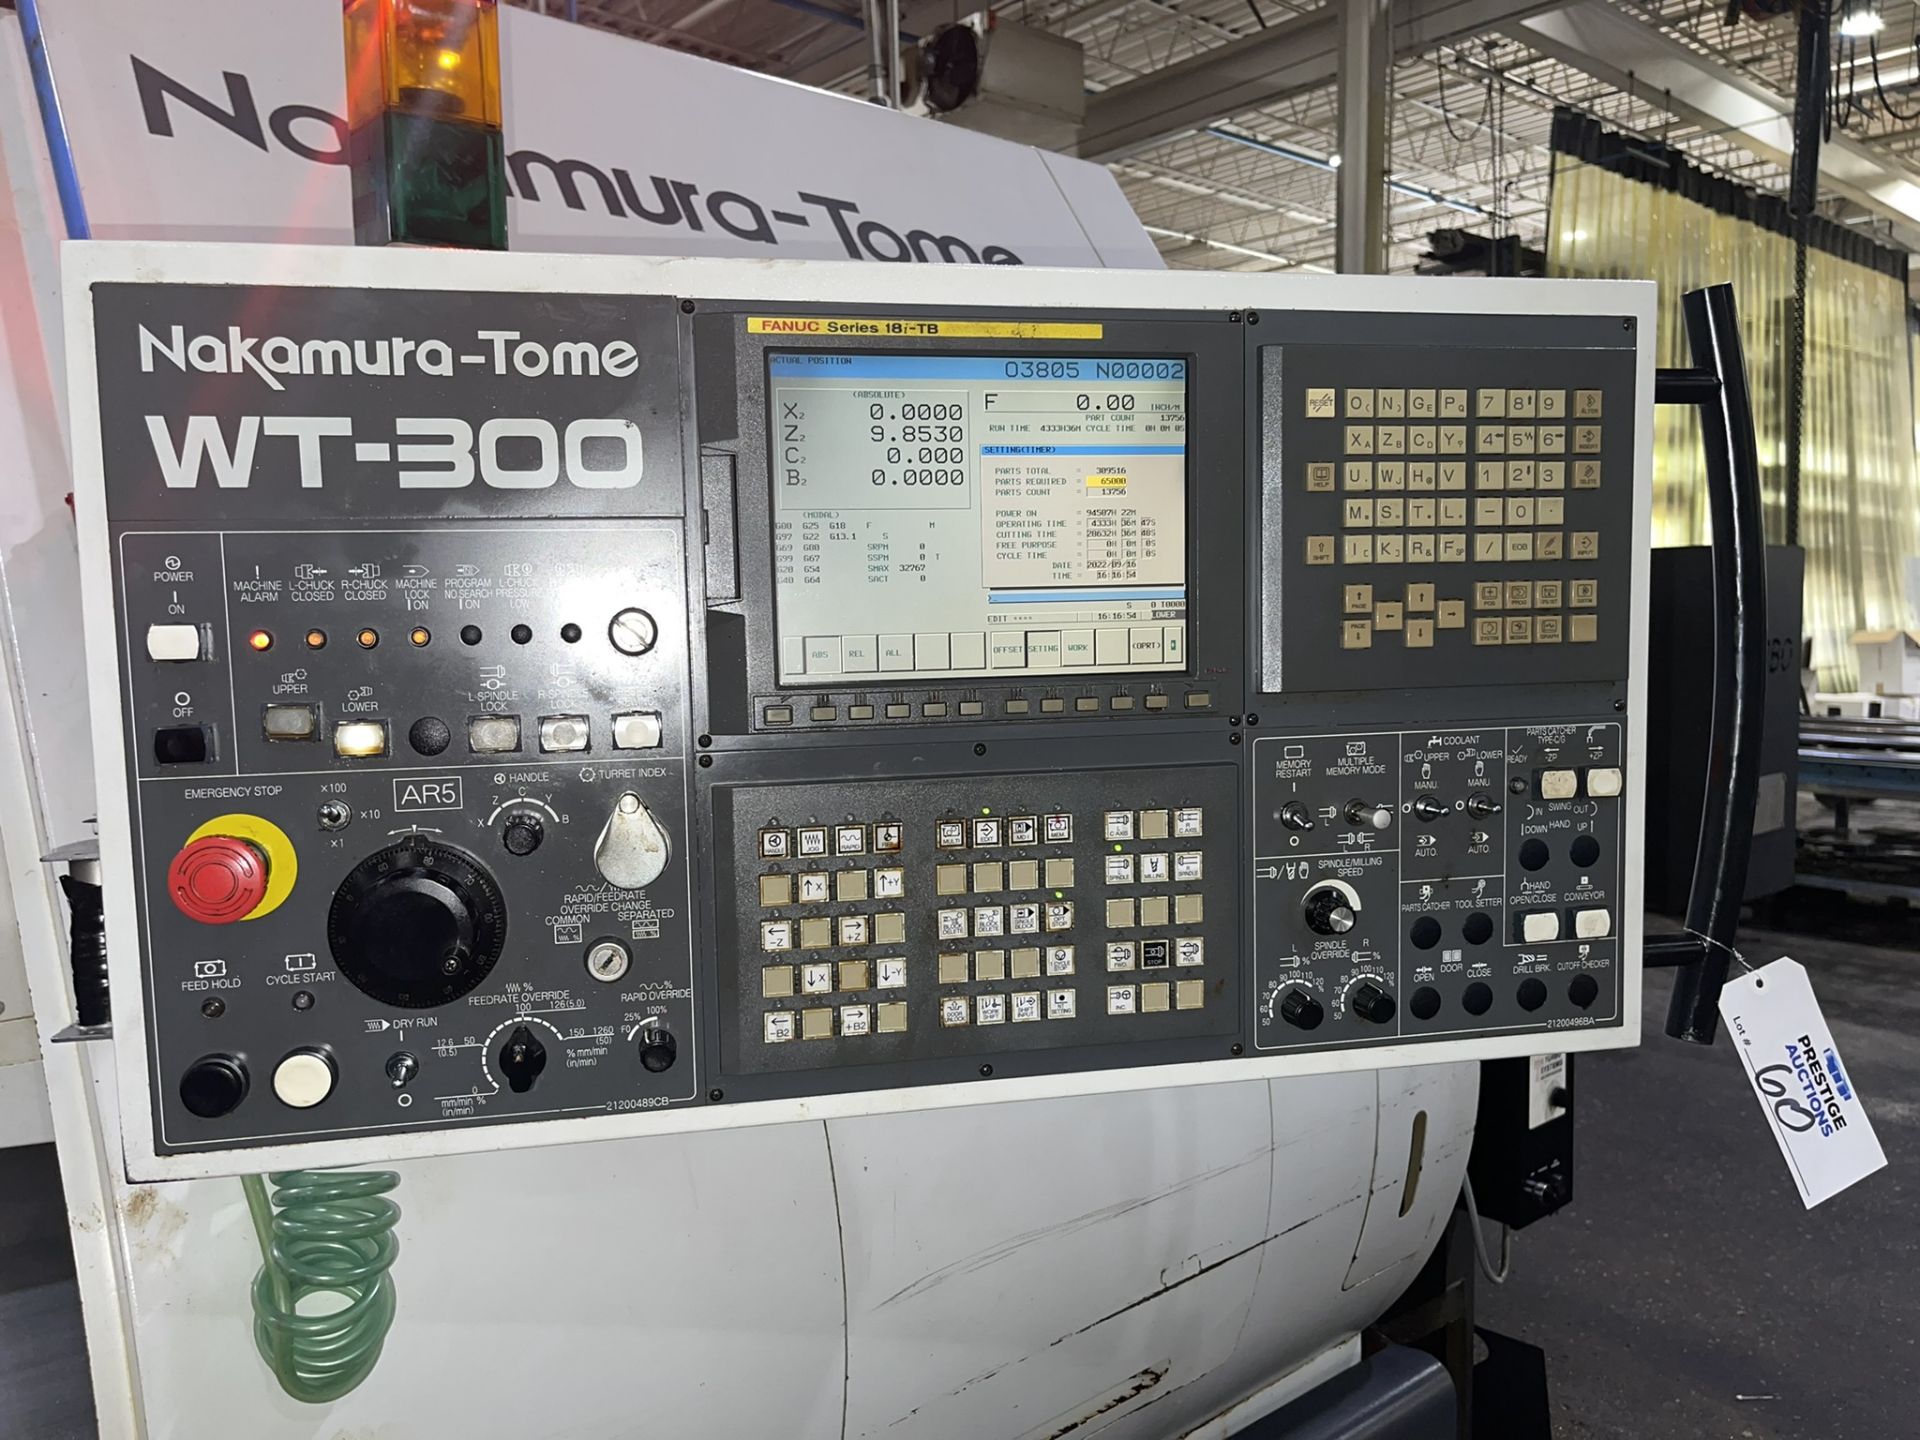 2007 Nakamura Tome WT-300 8-Axis CNC Turning/Milling Center, S/N M300909 - Image 9 of 19